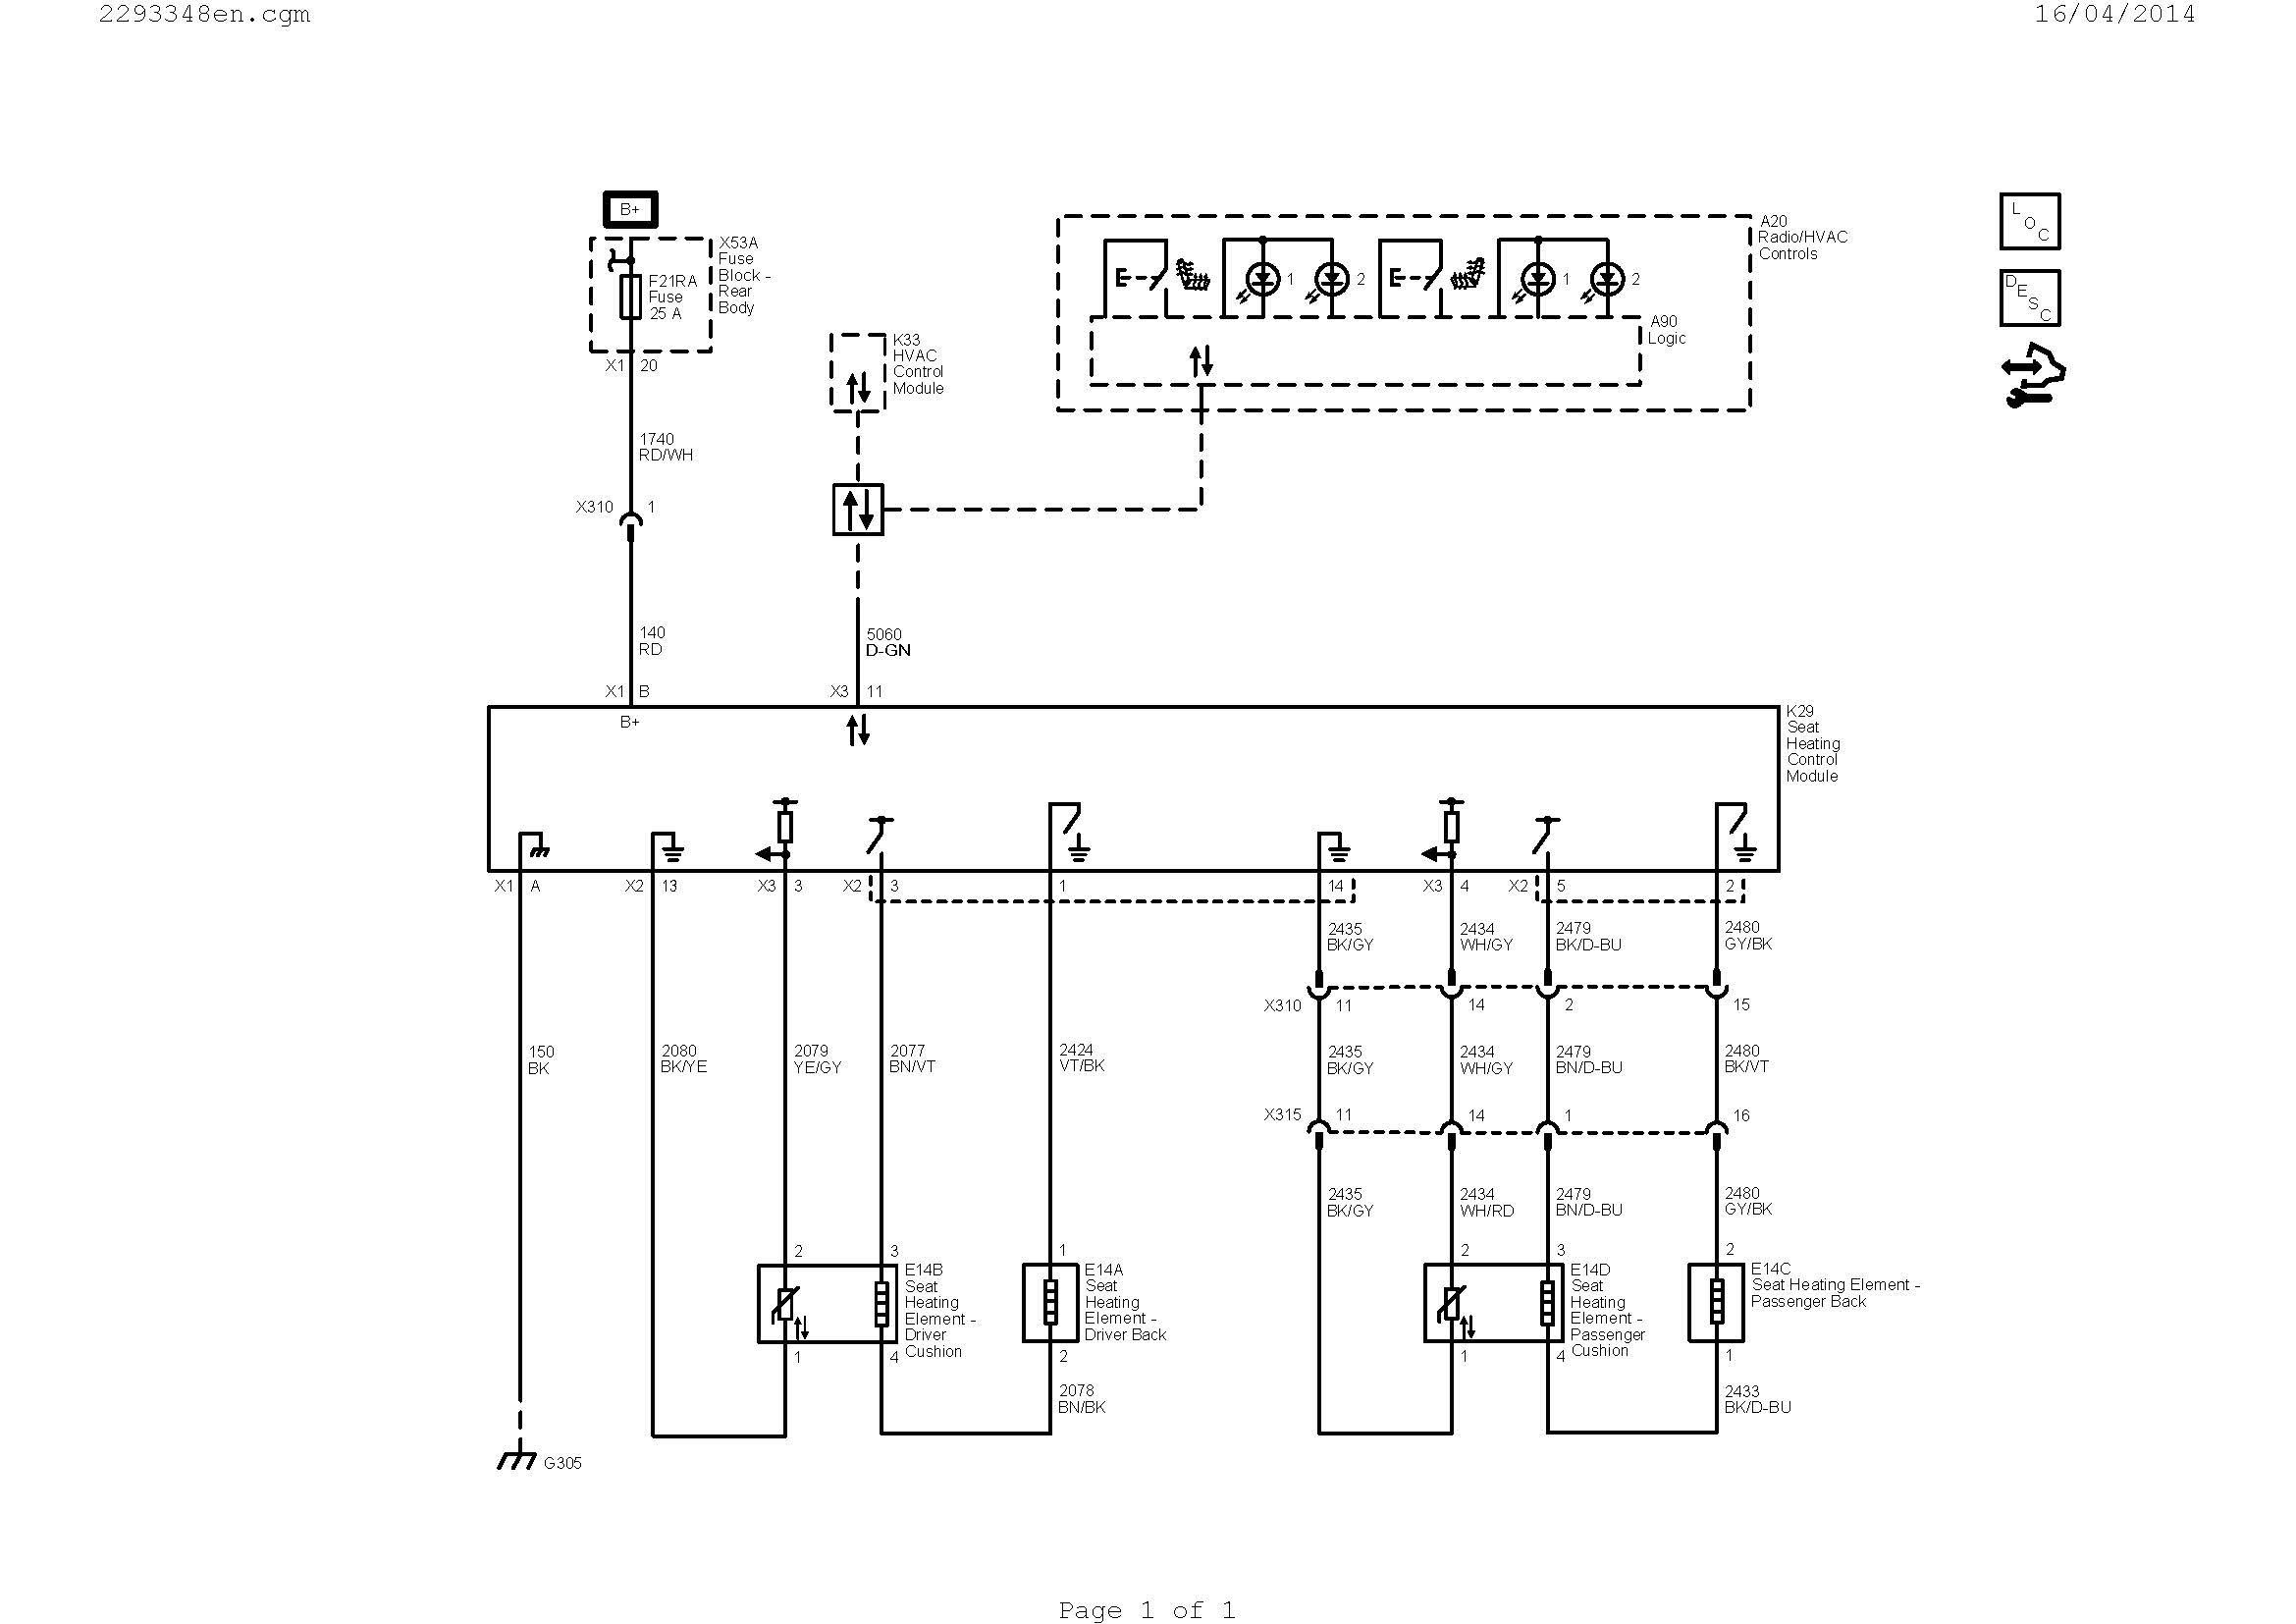 Fresh Wiring Diagrams for Electrical Hvac Wiring Diagram software Collection